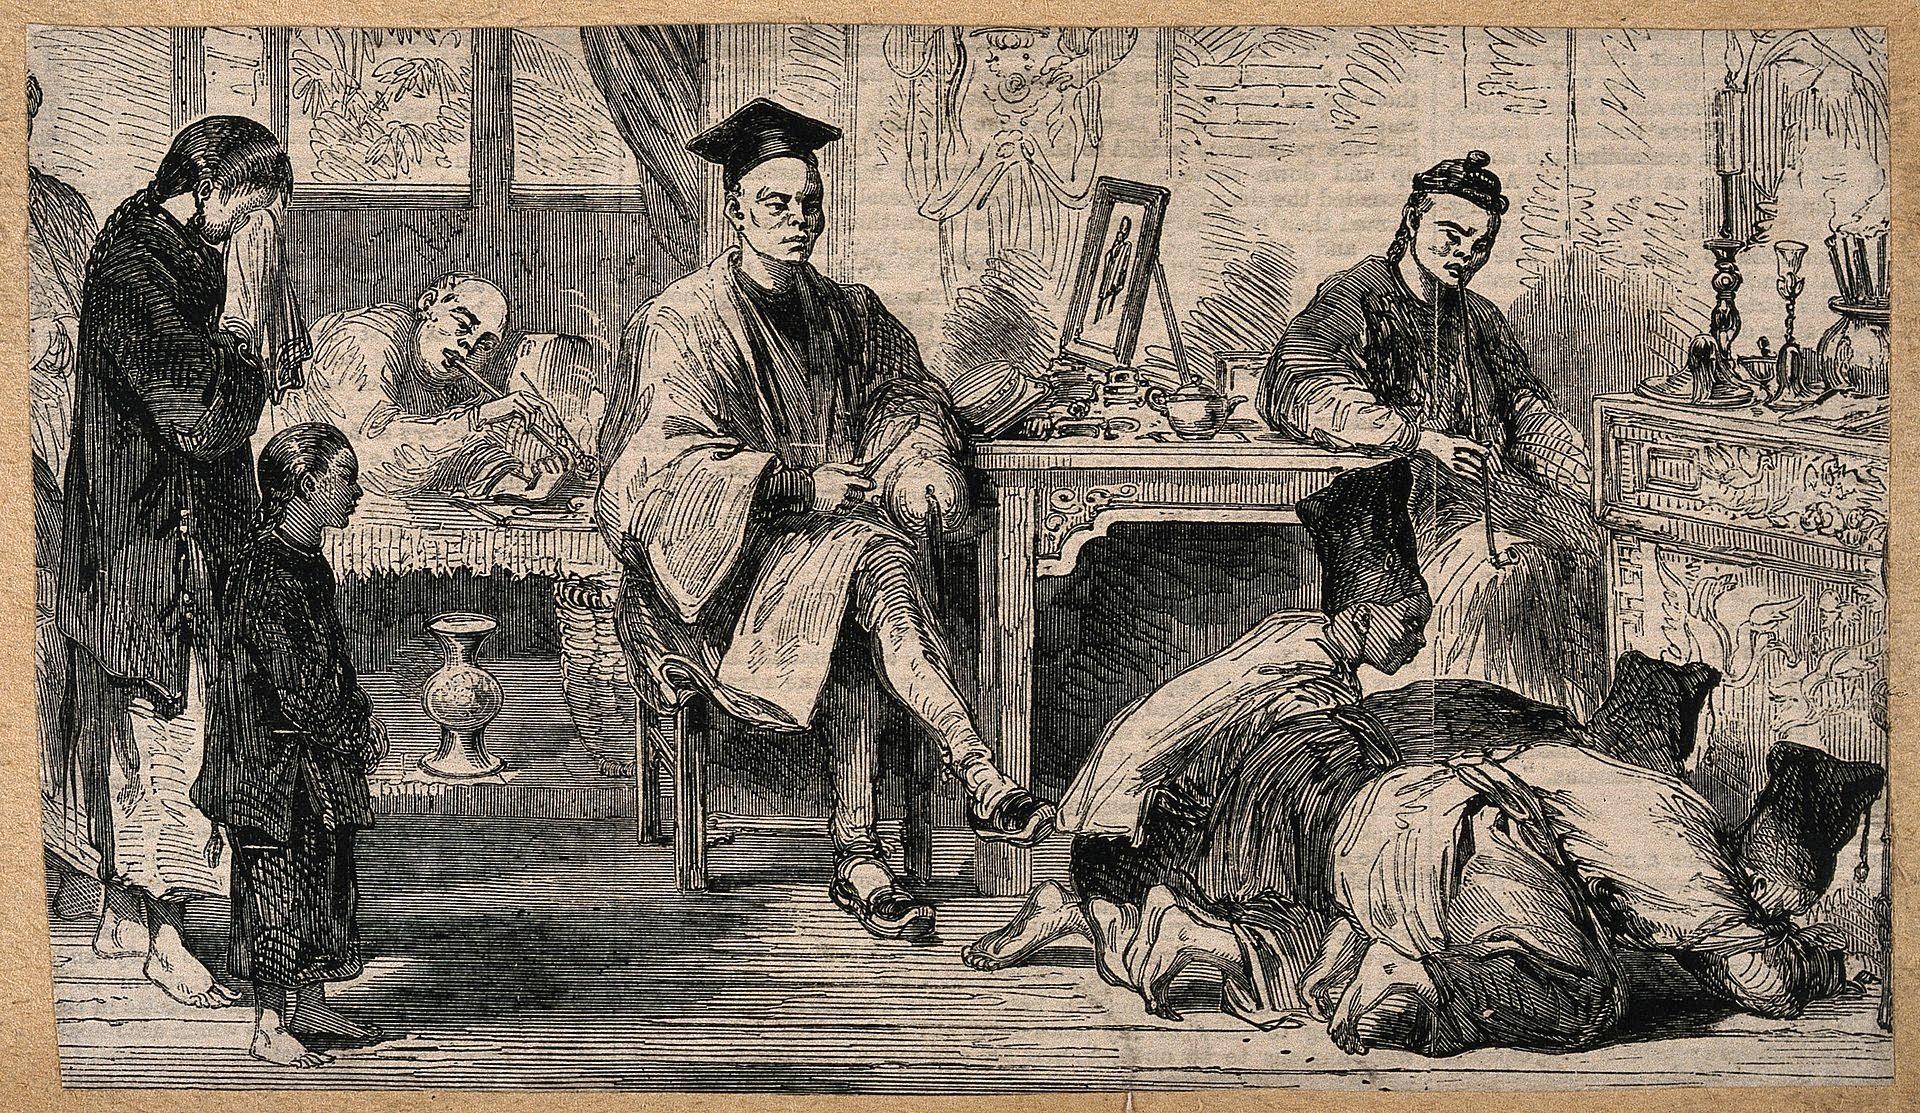 A wood engraving shows 3 people 'kowtowing' to an alter, one woman crying, others smoking opium in paying their last respects to a Chinese merchant's wife.